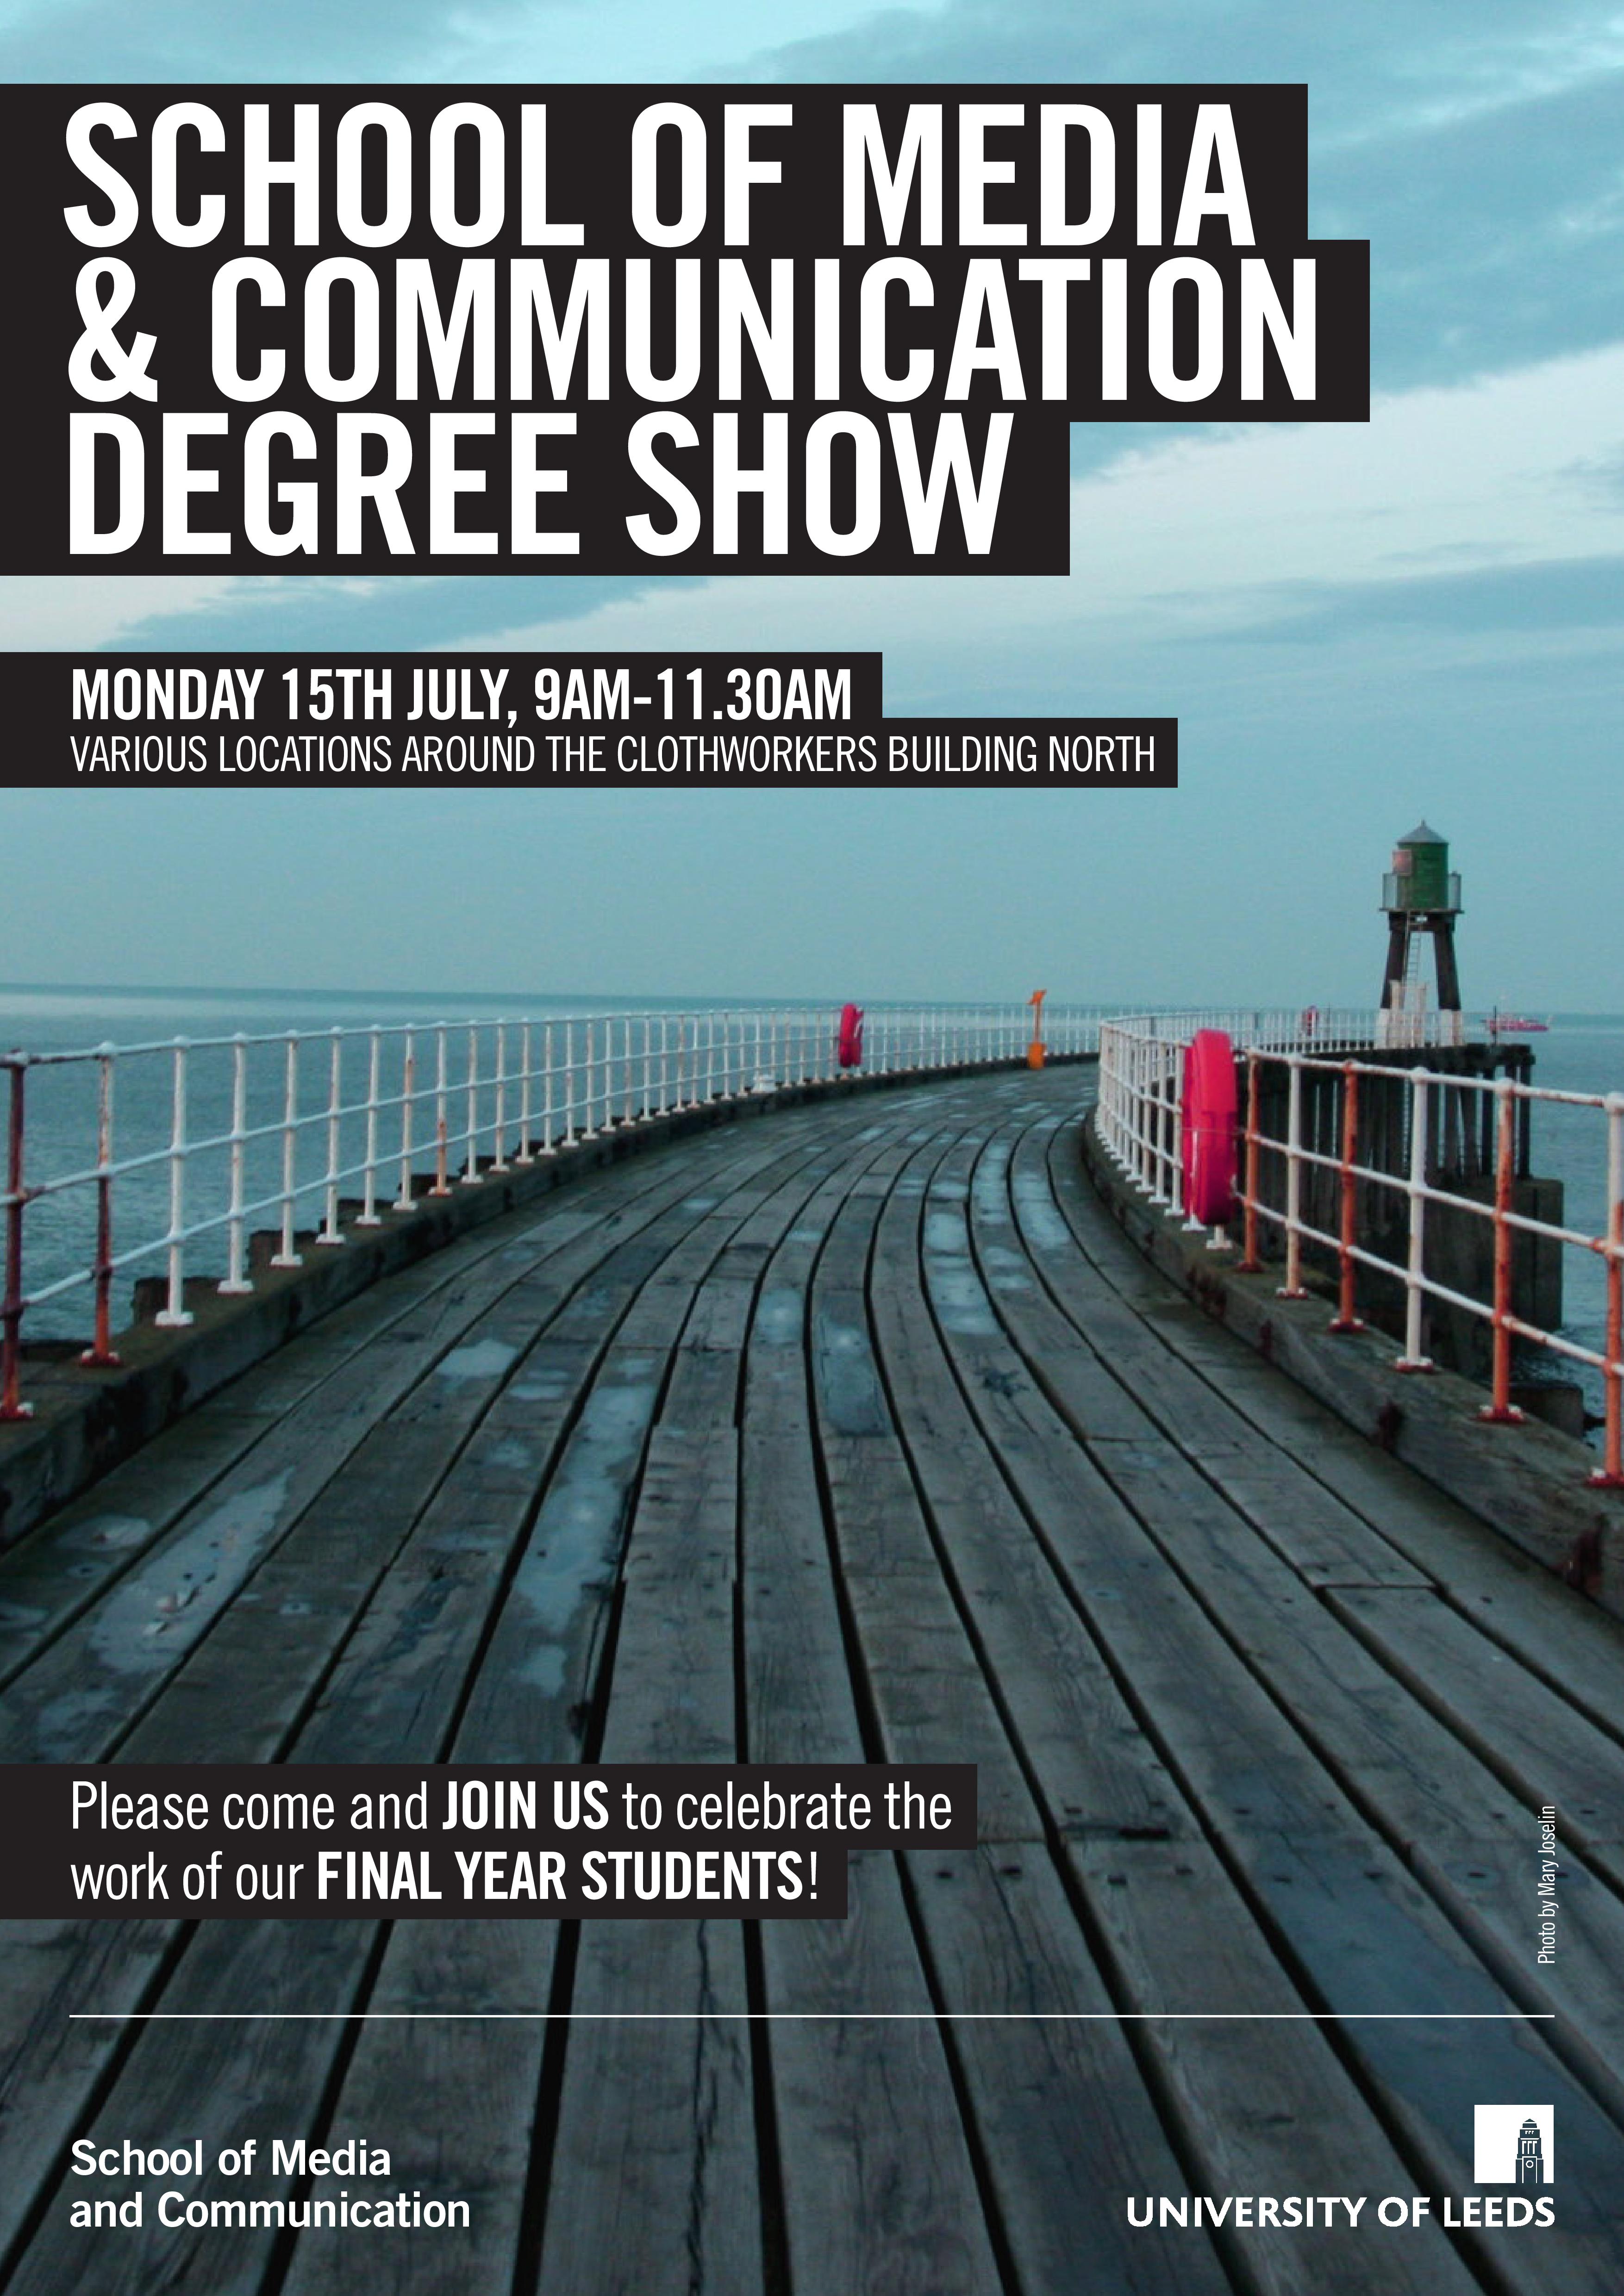 School of Media and Communication's degree show 2019